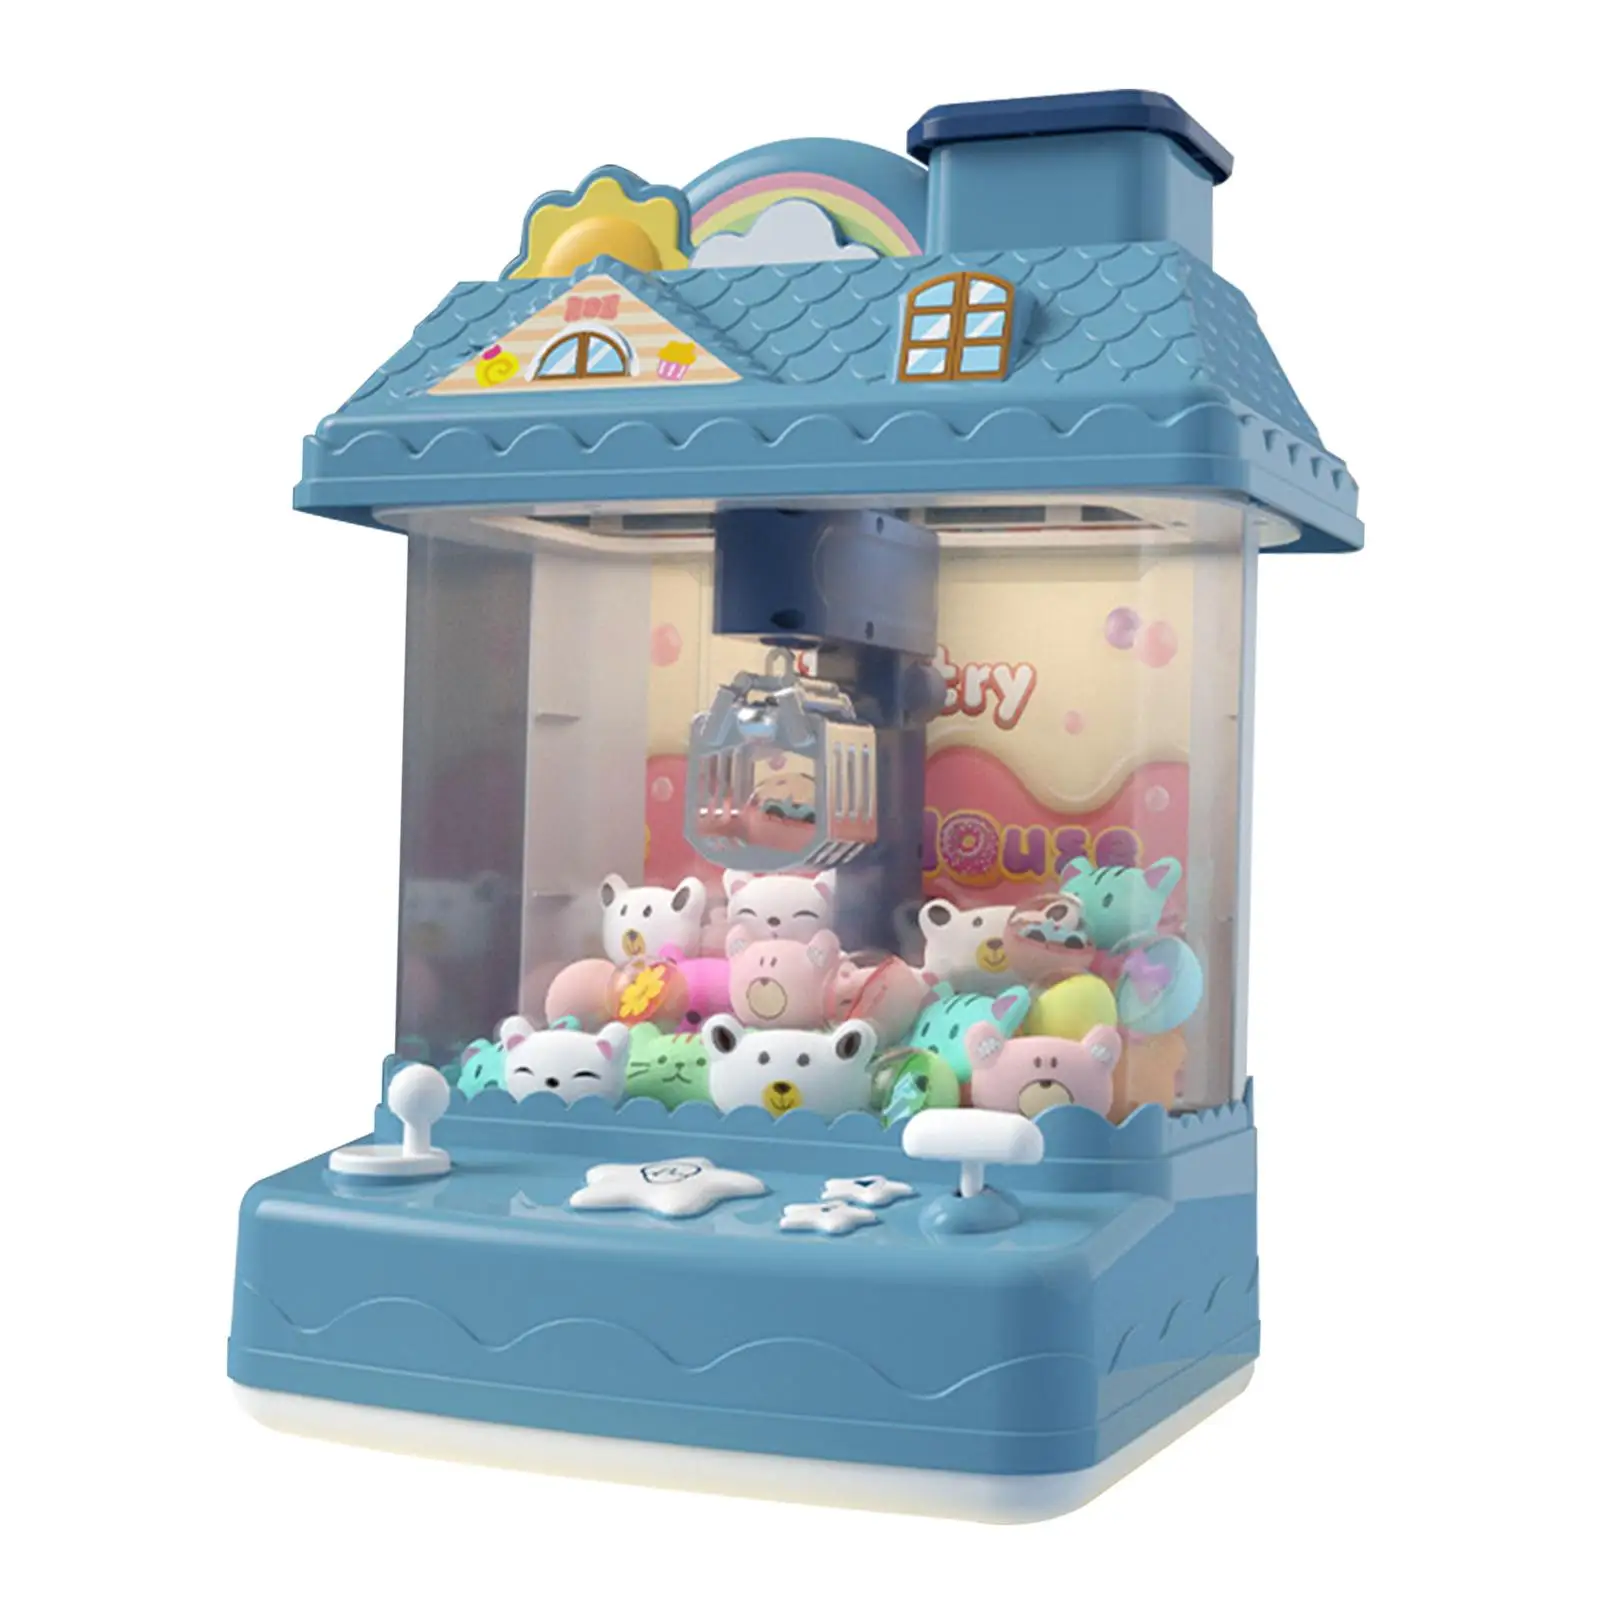 Claw Machine with Music & Light Indoor Grabber Prize Dispenser Toys Candy Capsule Claw Game for Children Girls Boys Kids Gift